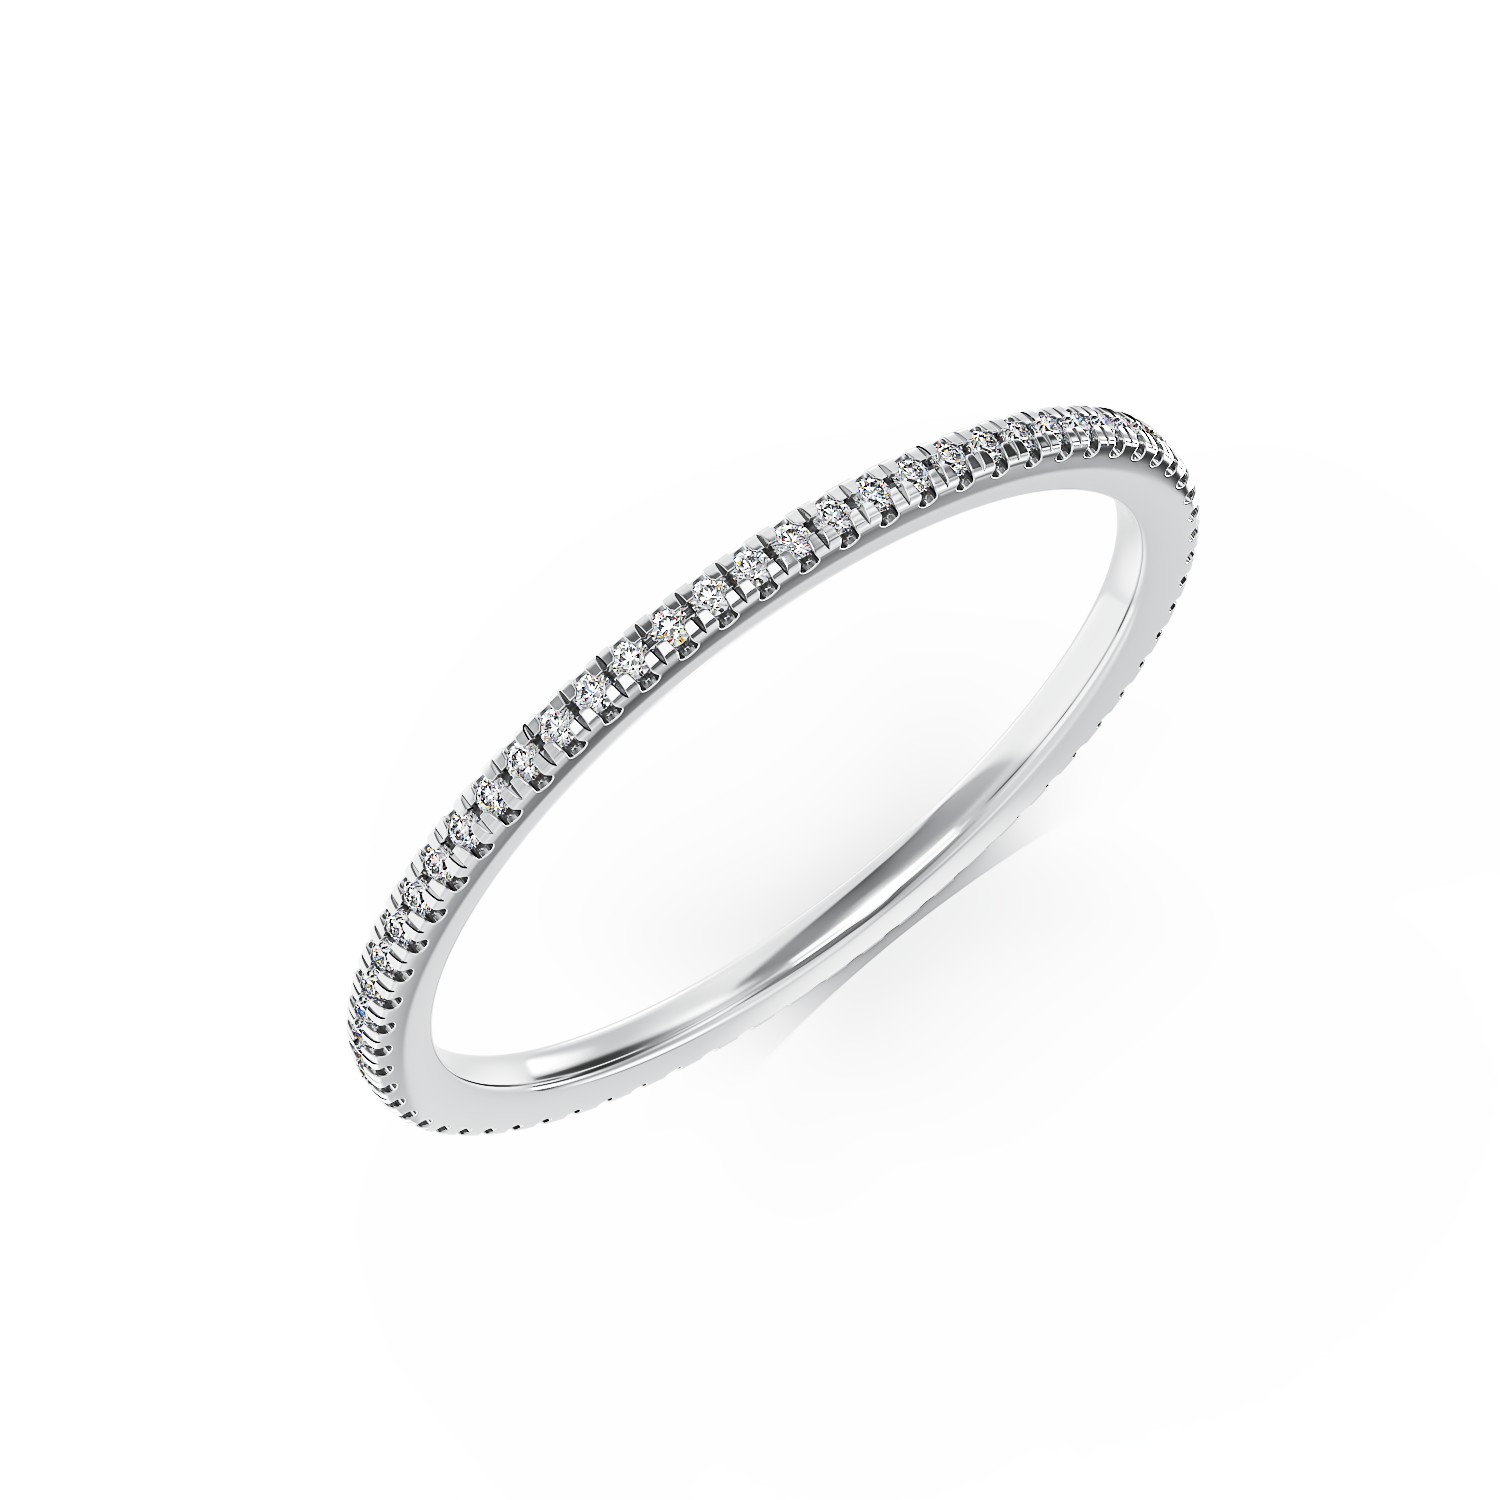 18K white gold infinity ring with 0.15ct diamonds